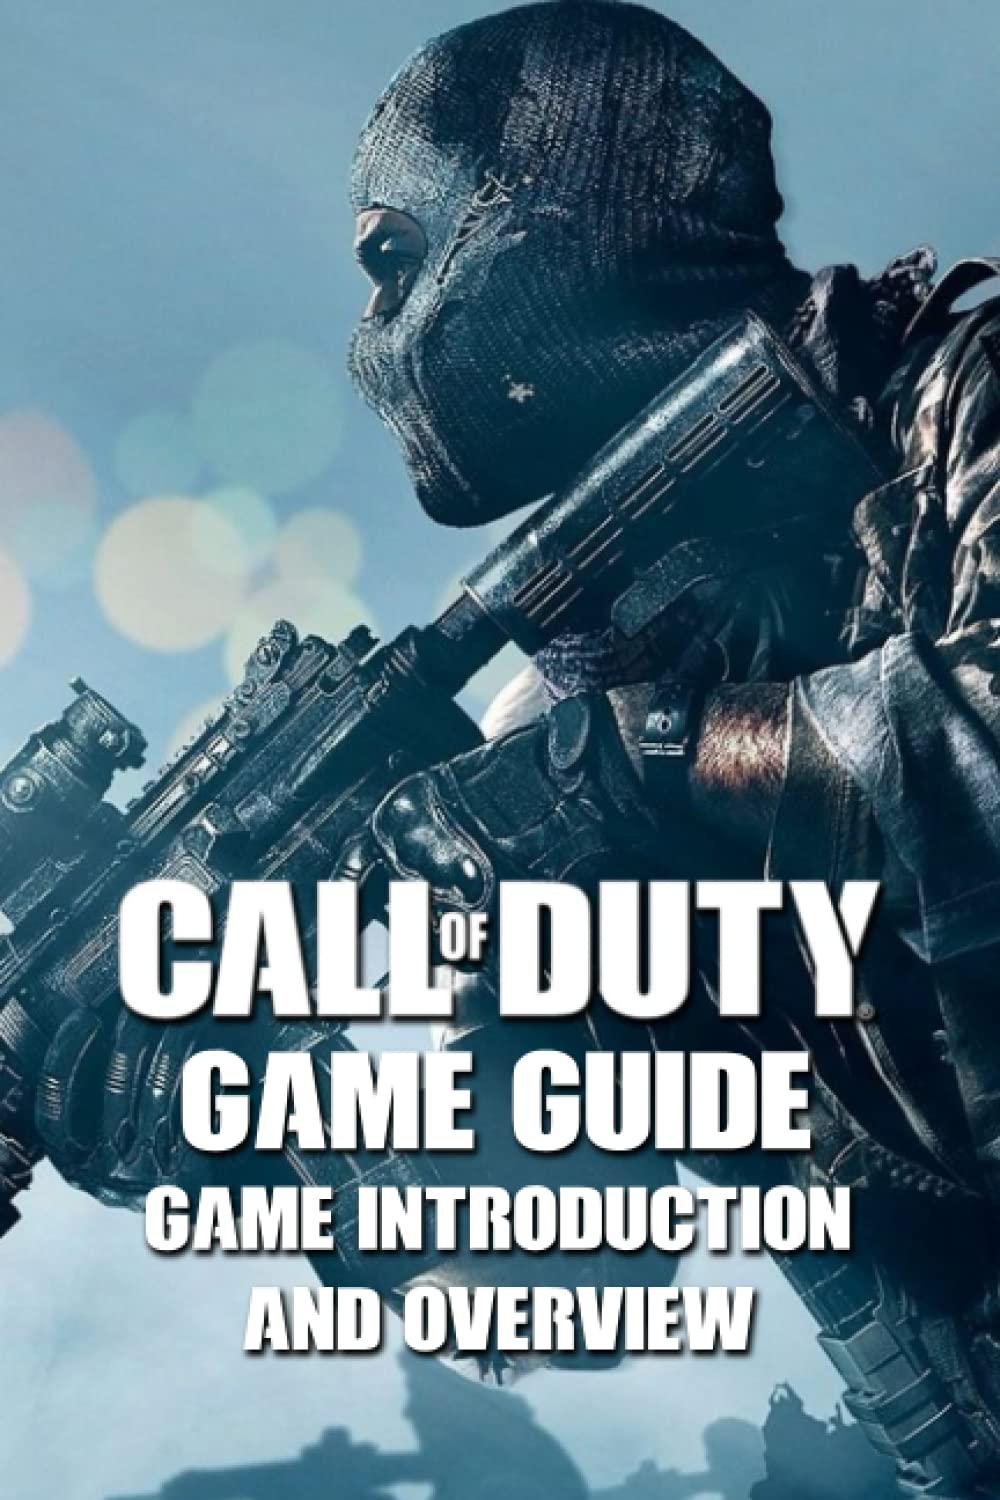 Guide Introduction and Game Overview - Call of Duty